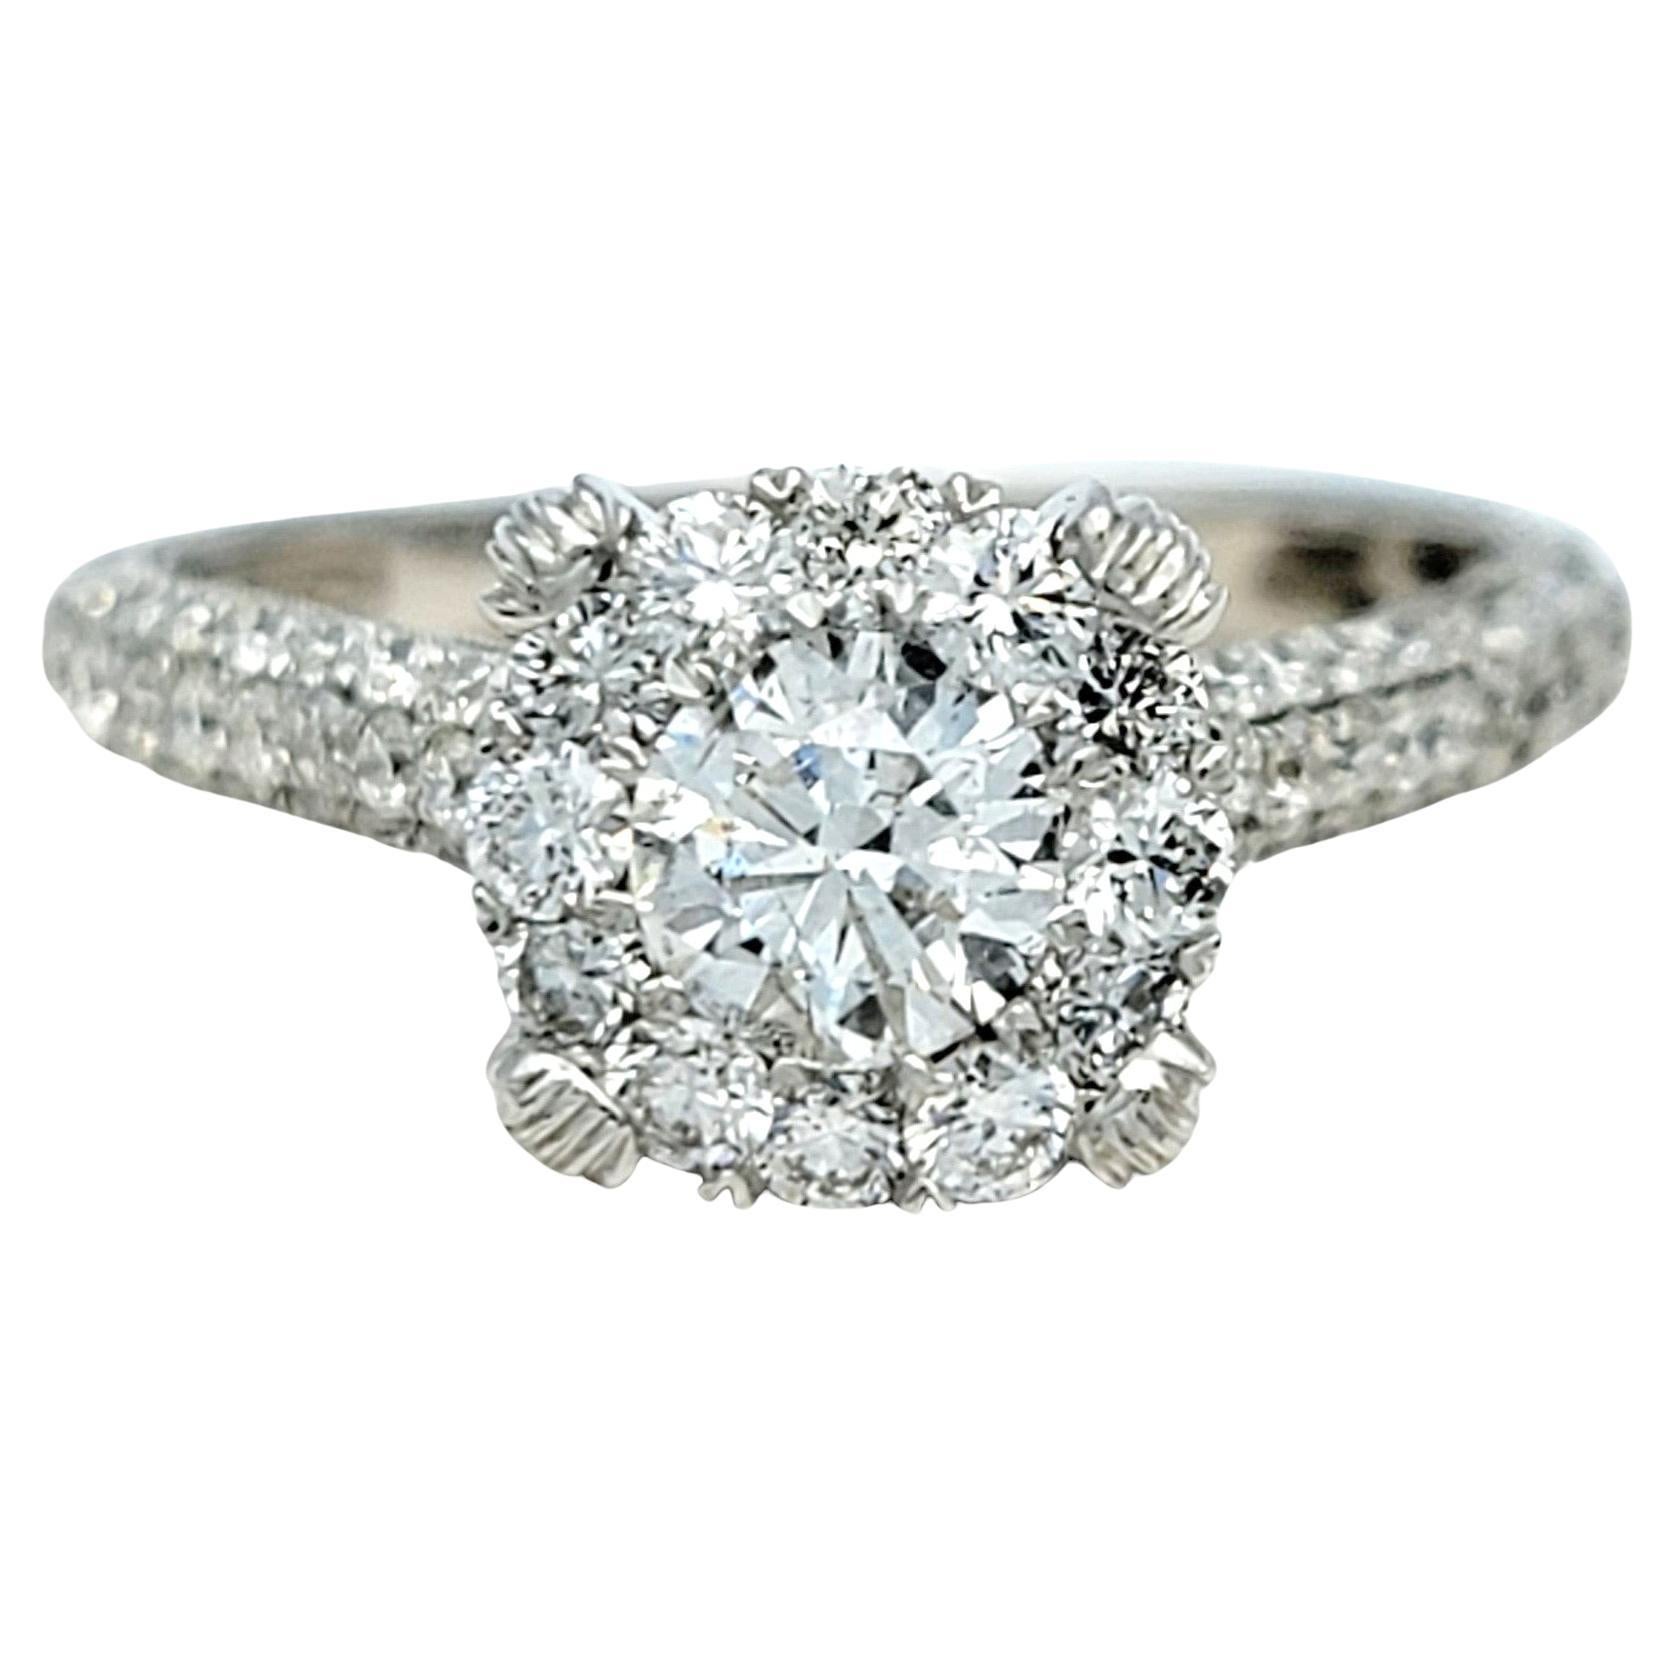 Ring size 7.5

Experience the epitome of elegance with this stunning diamond engagement ring, a dazzling testament to everlasting love and timeless beauty. At its heart, a brilliant .65 carat round diamond takes center stage, capturing and